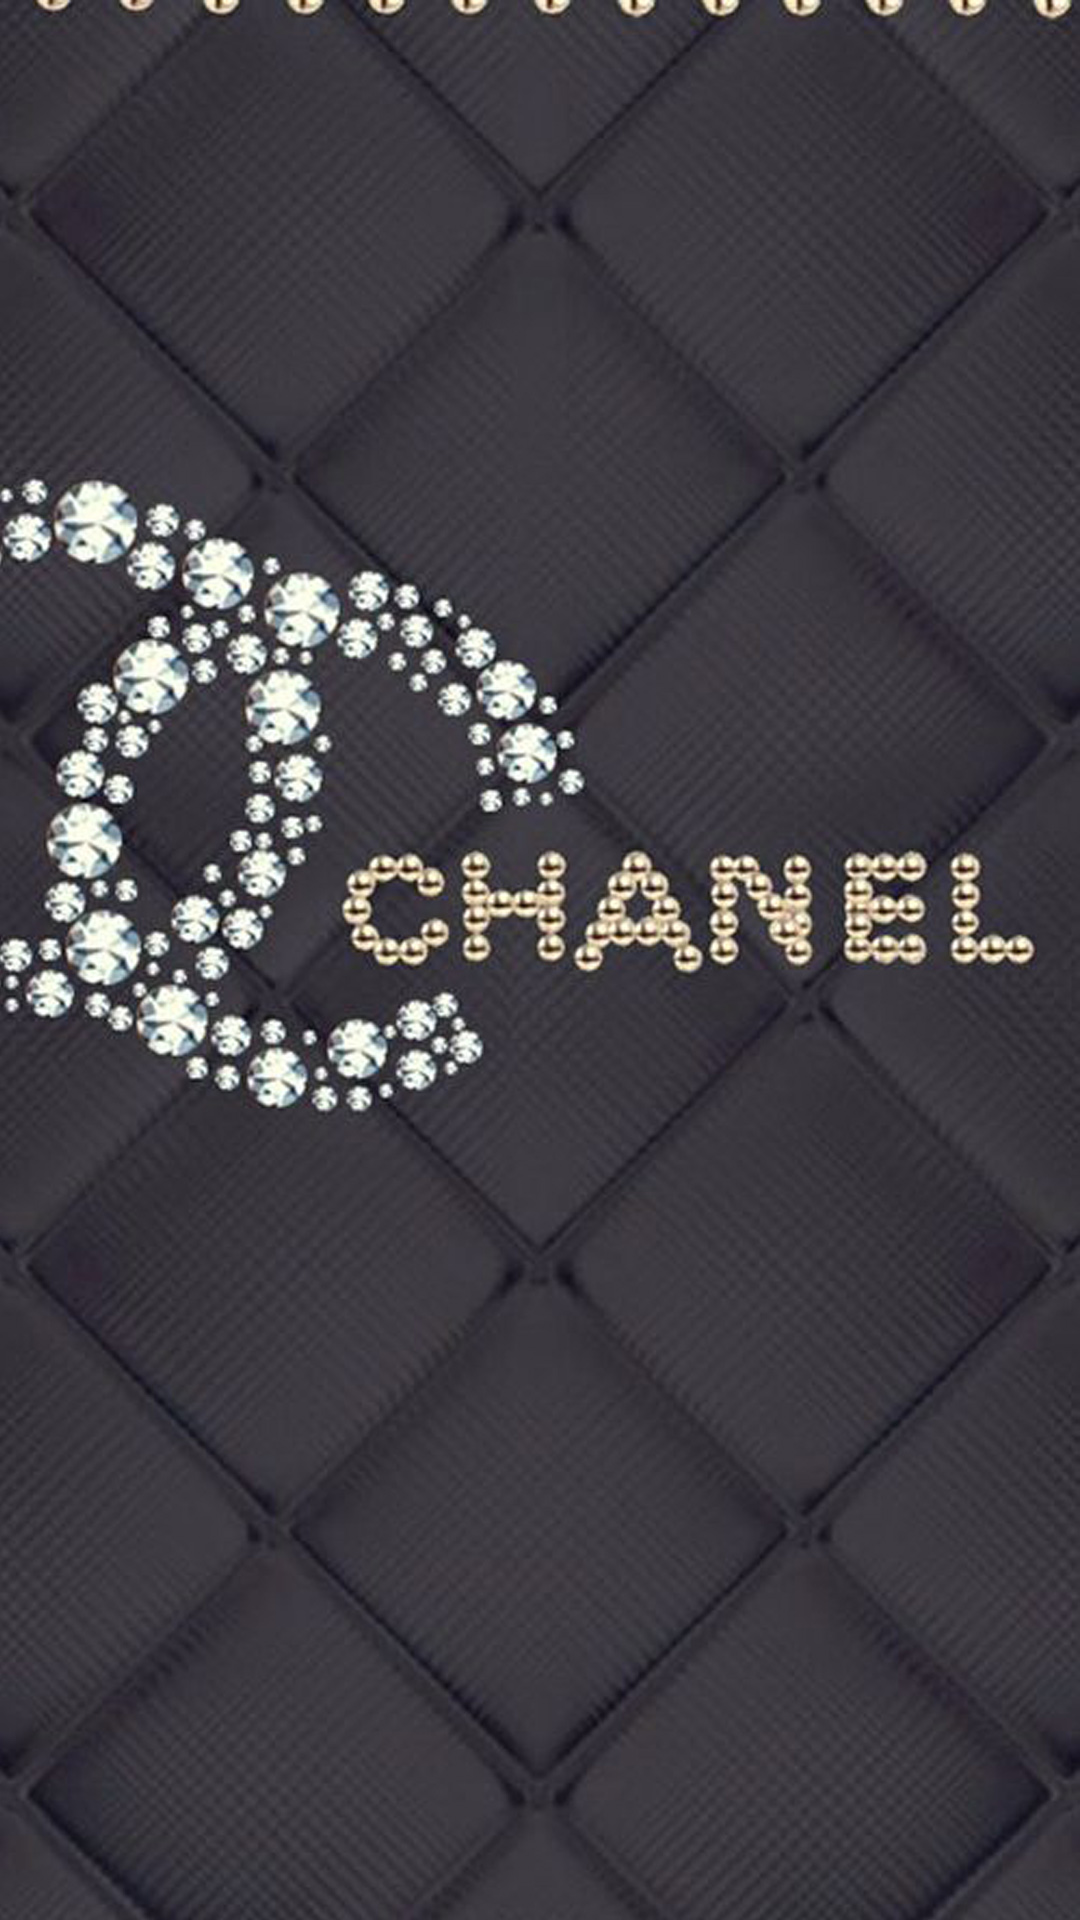 Chanel iPhone Background